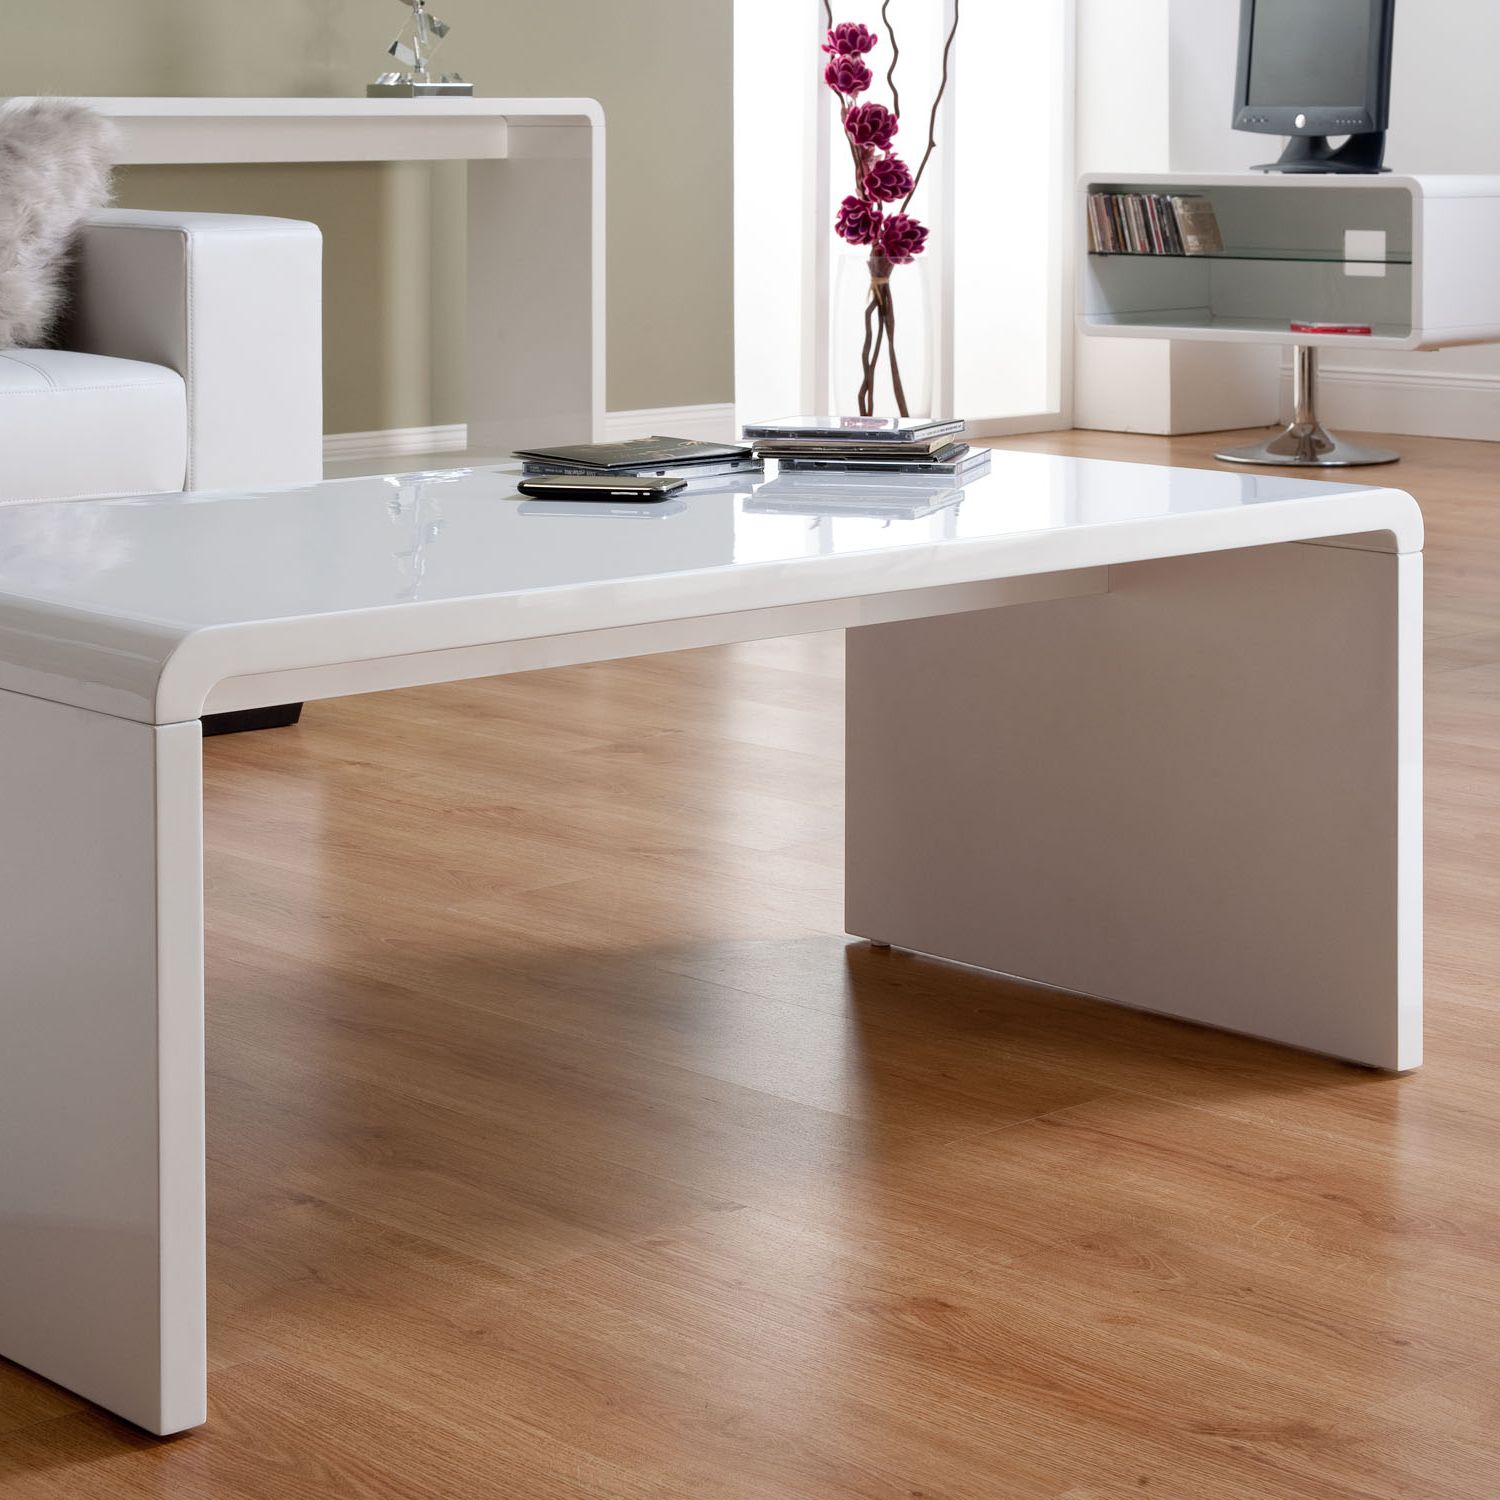 2020 Gloss White Steel Coffee Tables Throughout Toscana Gloss Coffee Table (View 5 of 20)